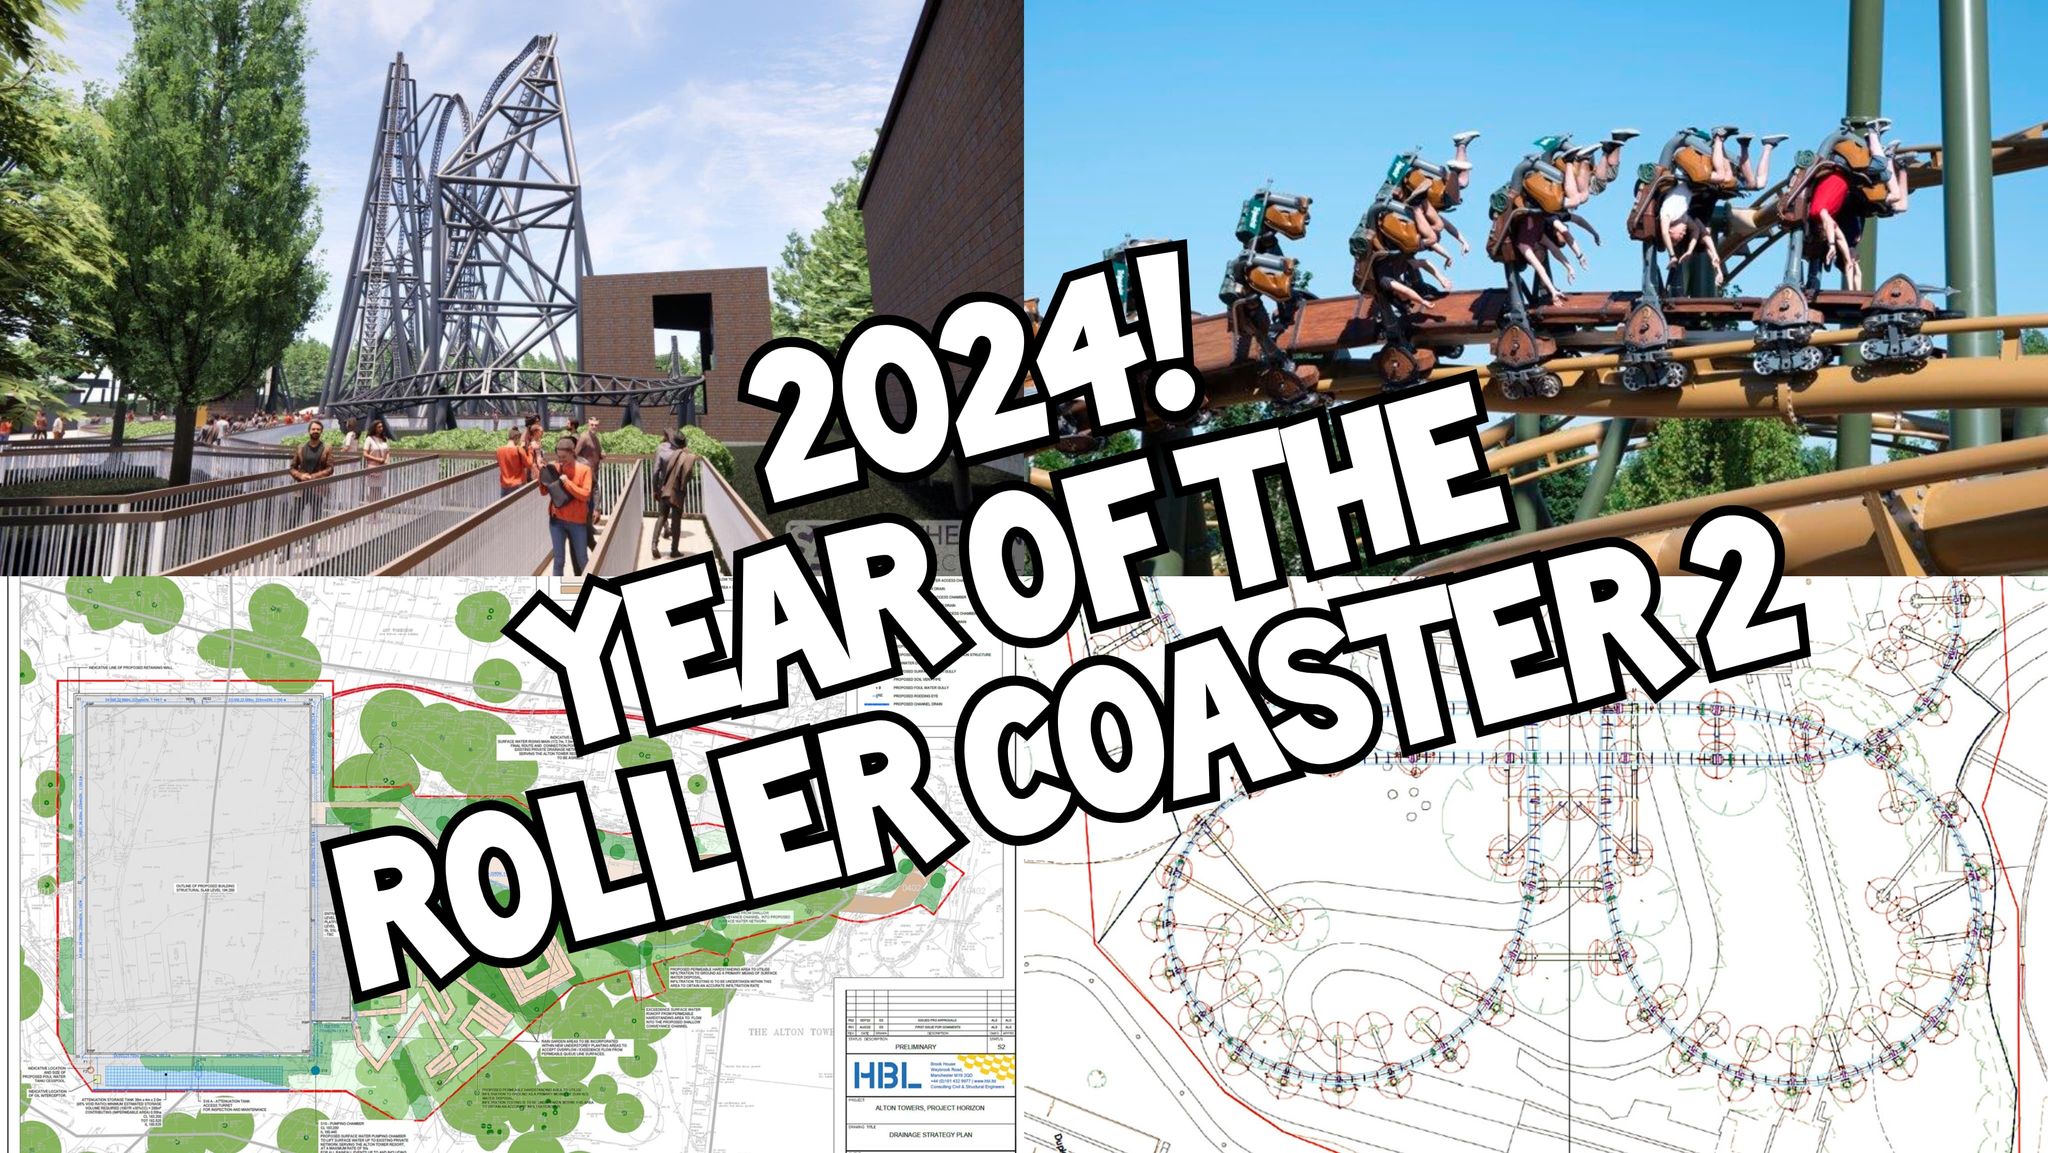 2024 Year Of The Roller Coaster 2?! Theme Park Insanity